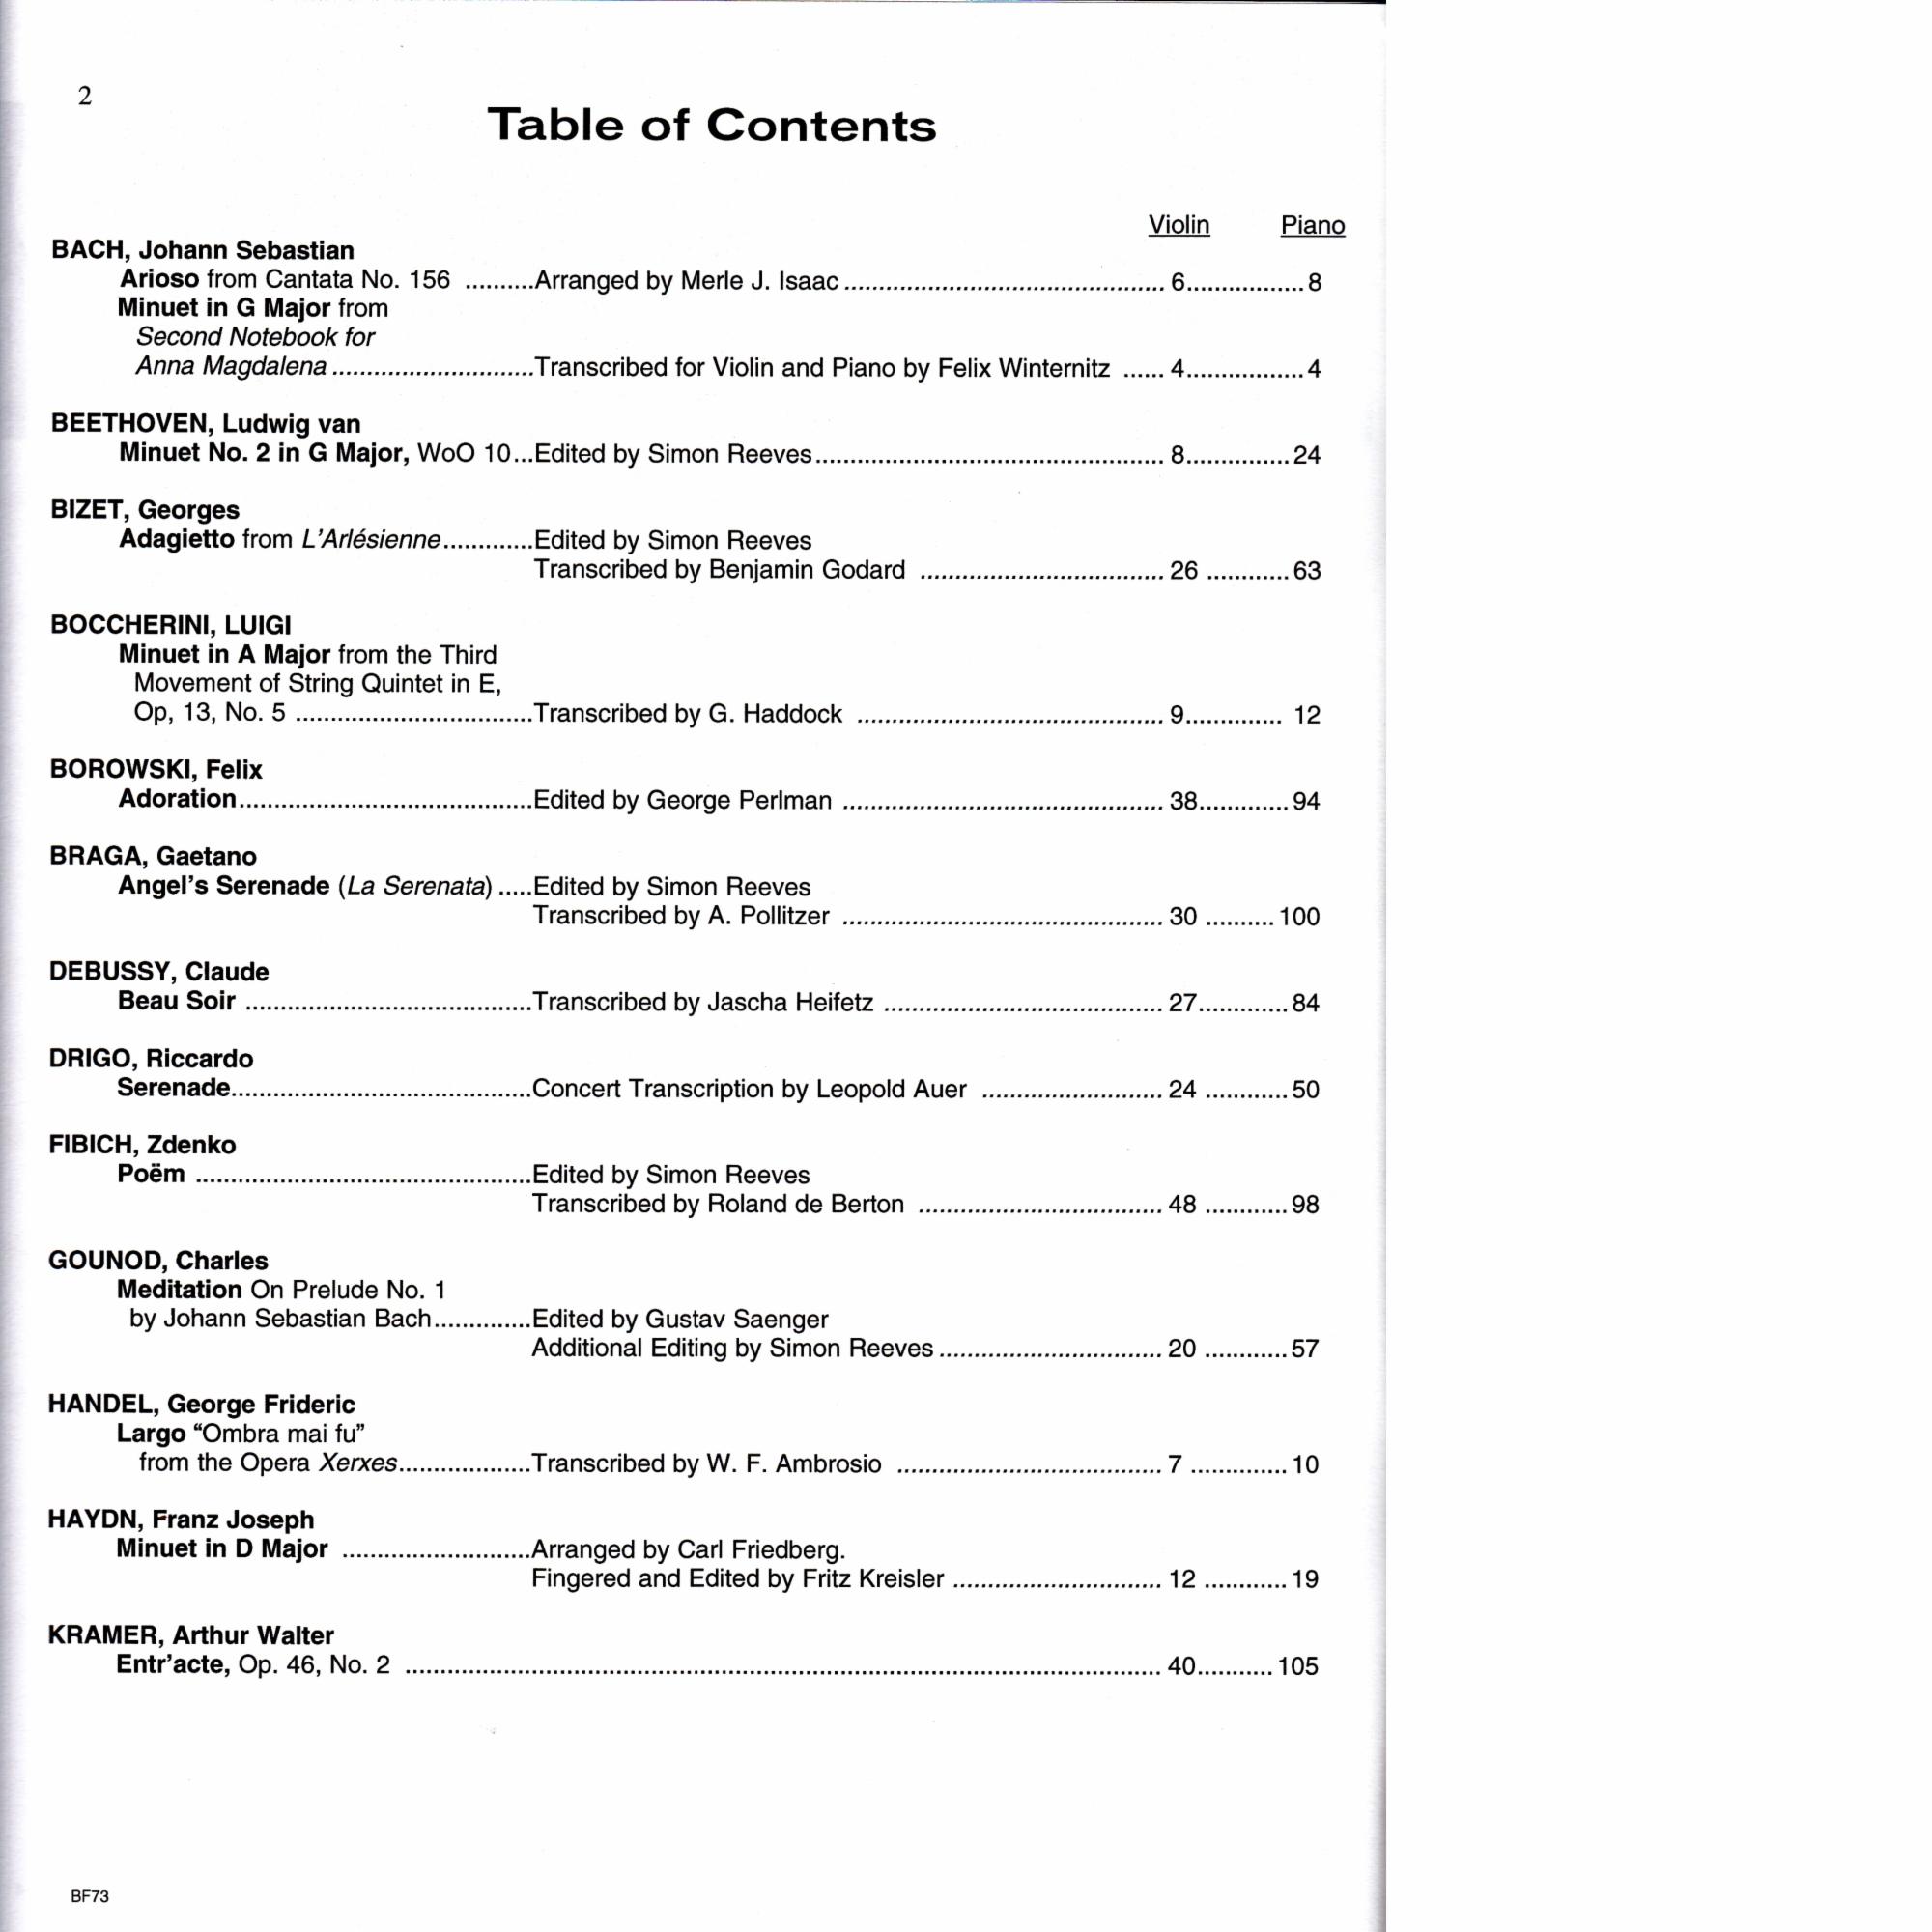 Contents page 1